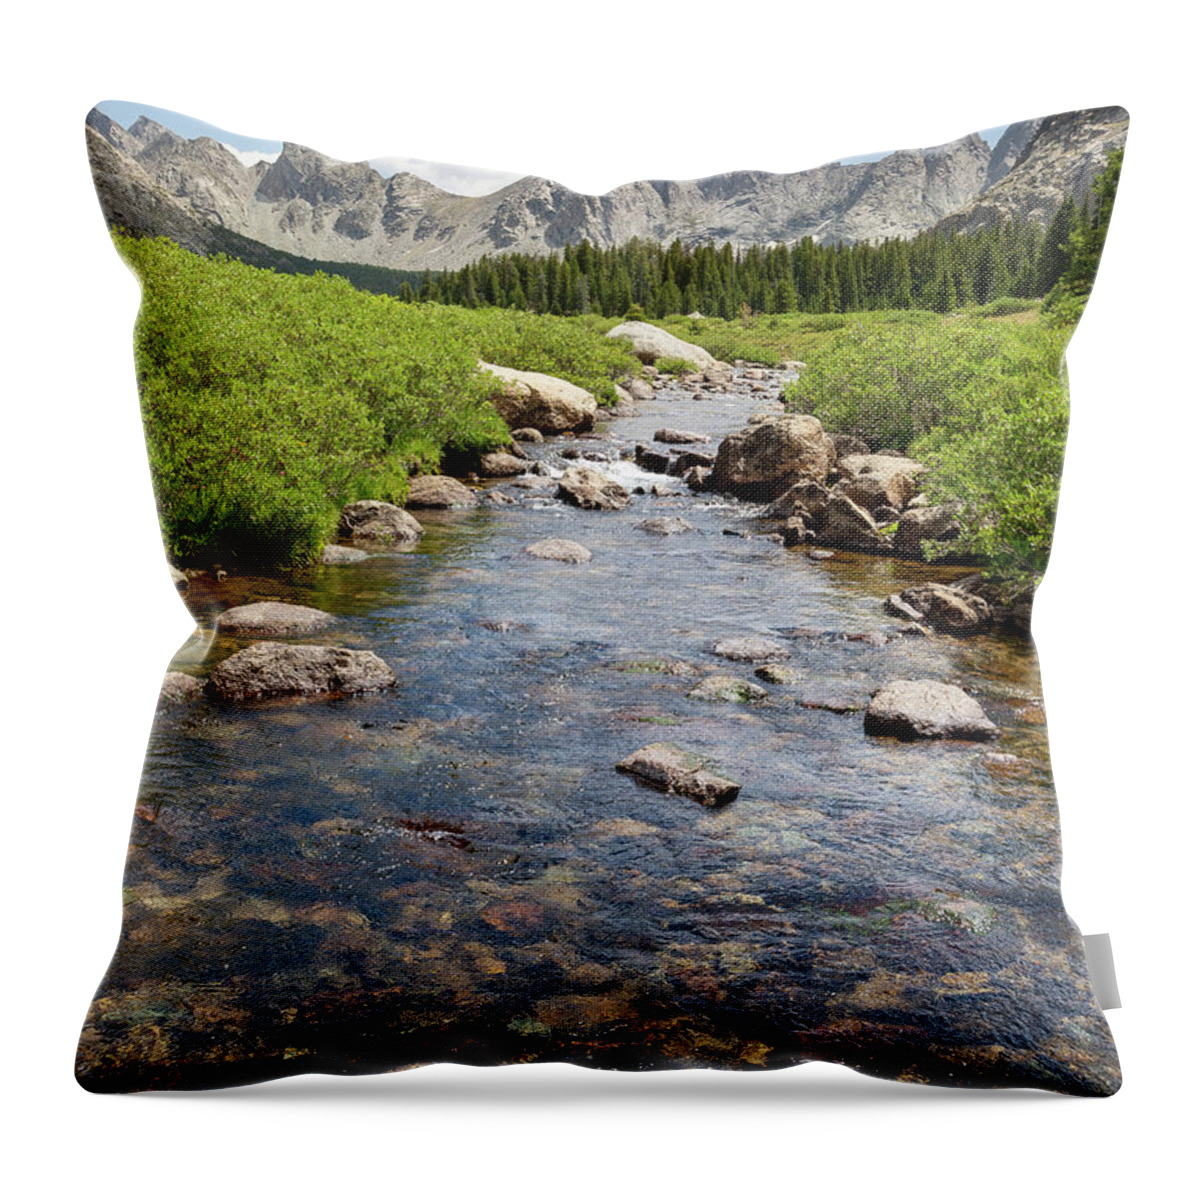 Wind River Throw Pillow featuring the photograph Wind River River by Aaron Spong